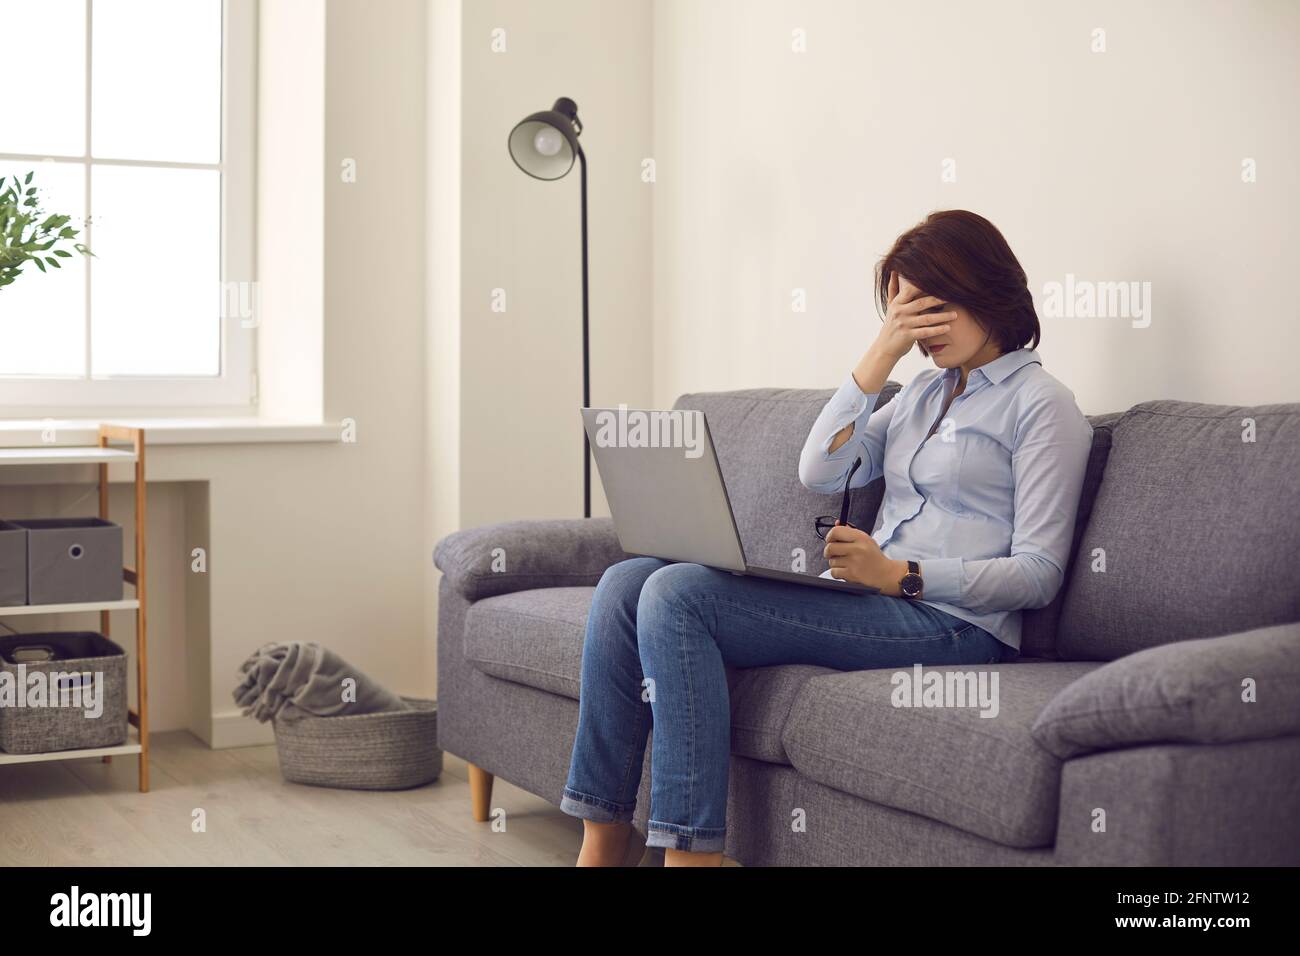 Woman sitting on sofa with laptop stops working and covers face feeling tired and unhappy Stock Photo